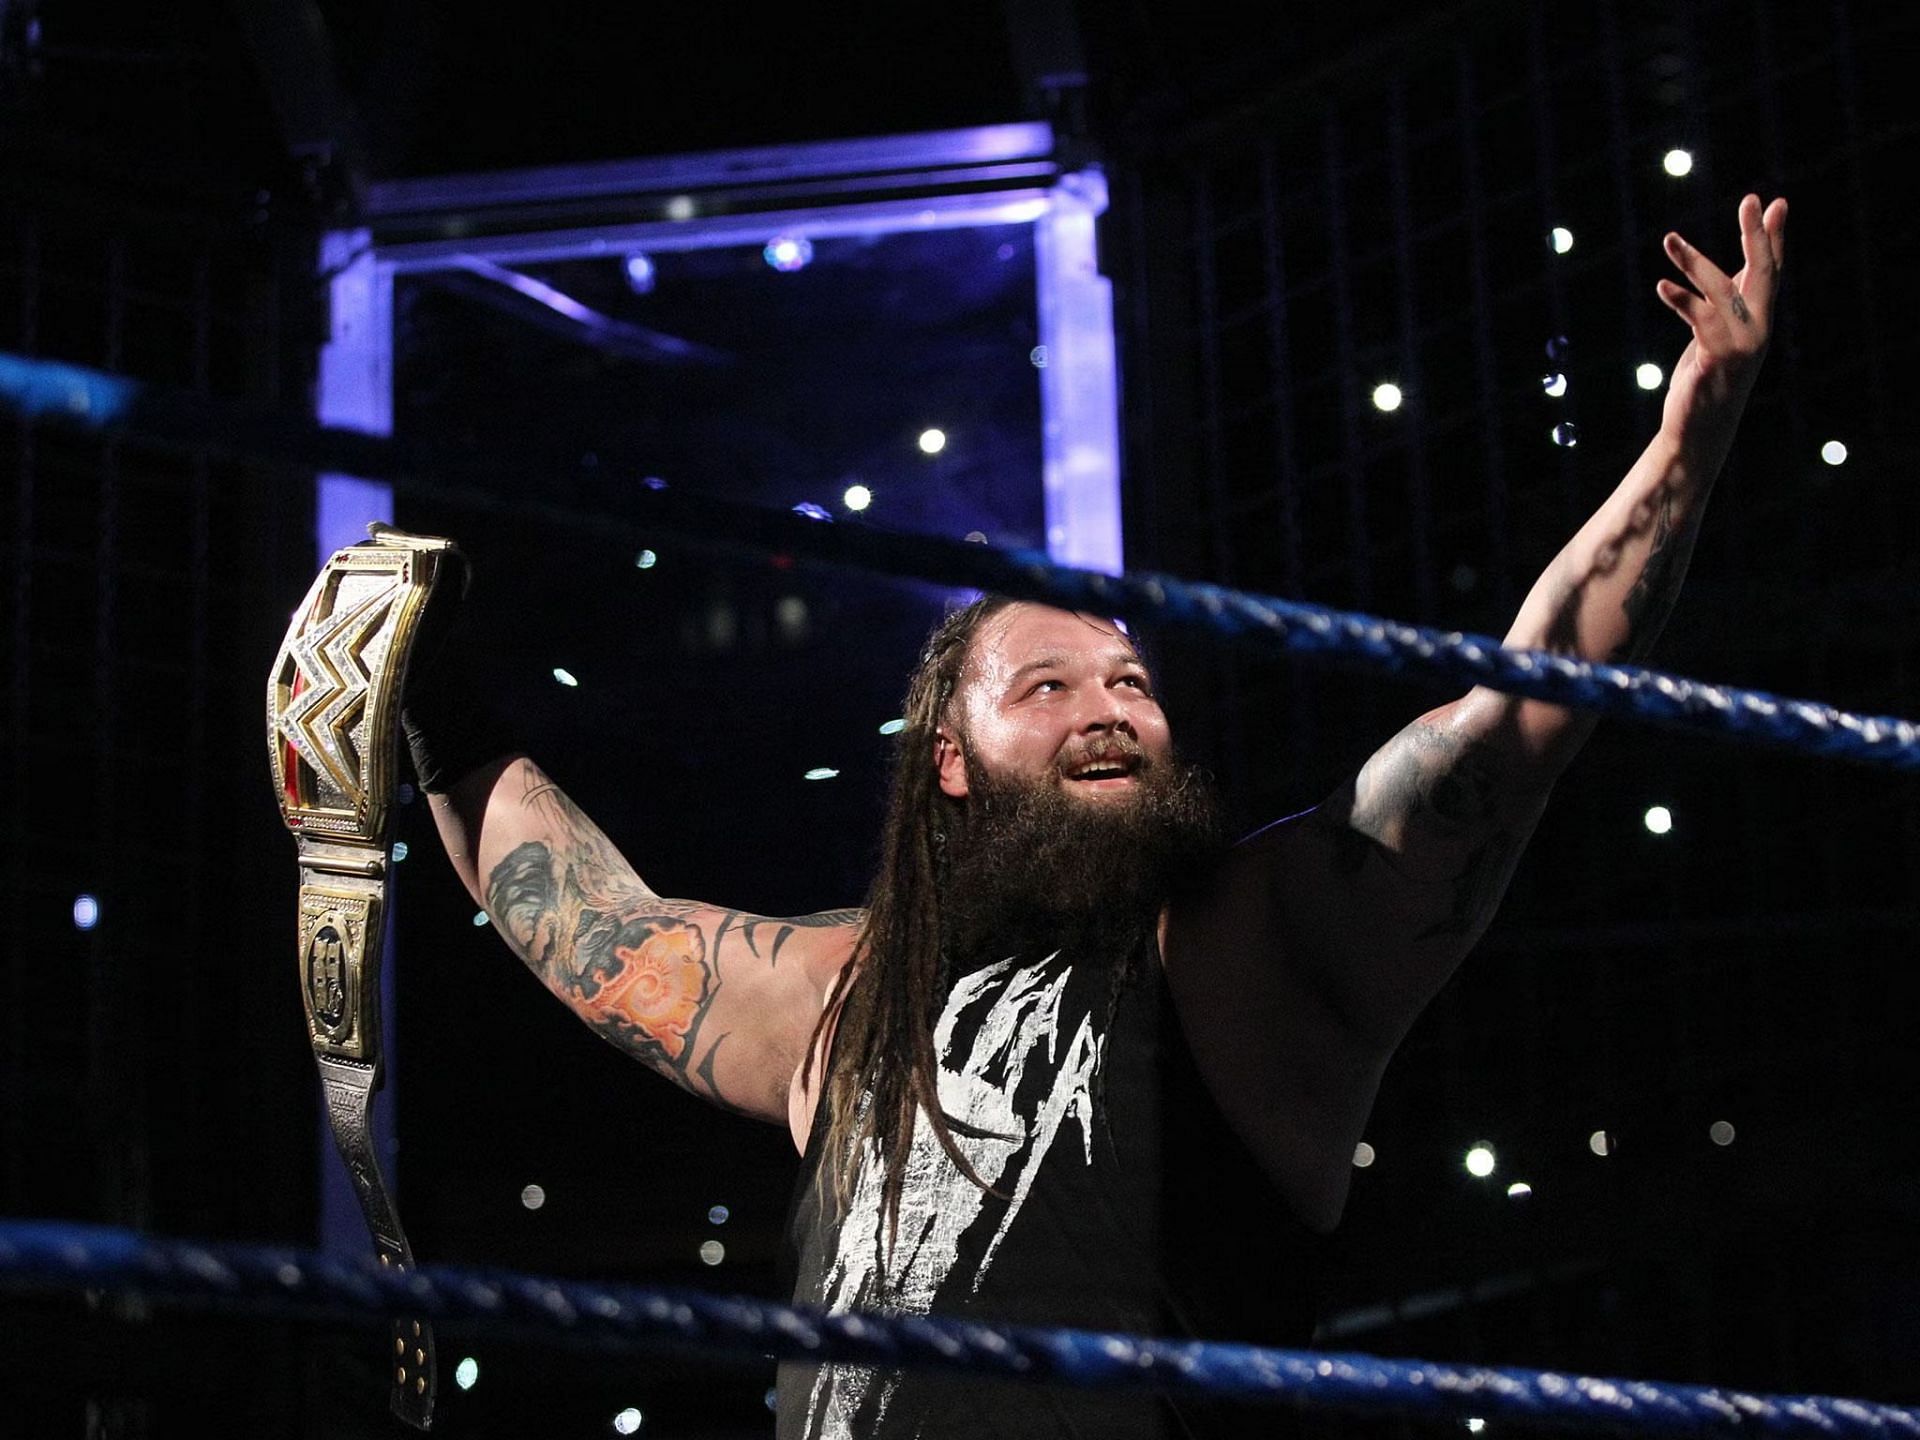 WWE: Bo Dallas should do this for him - WWE Universe pushes for new ' Legacy' faction as a tribute to Bray Wyatt